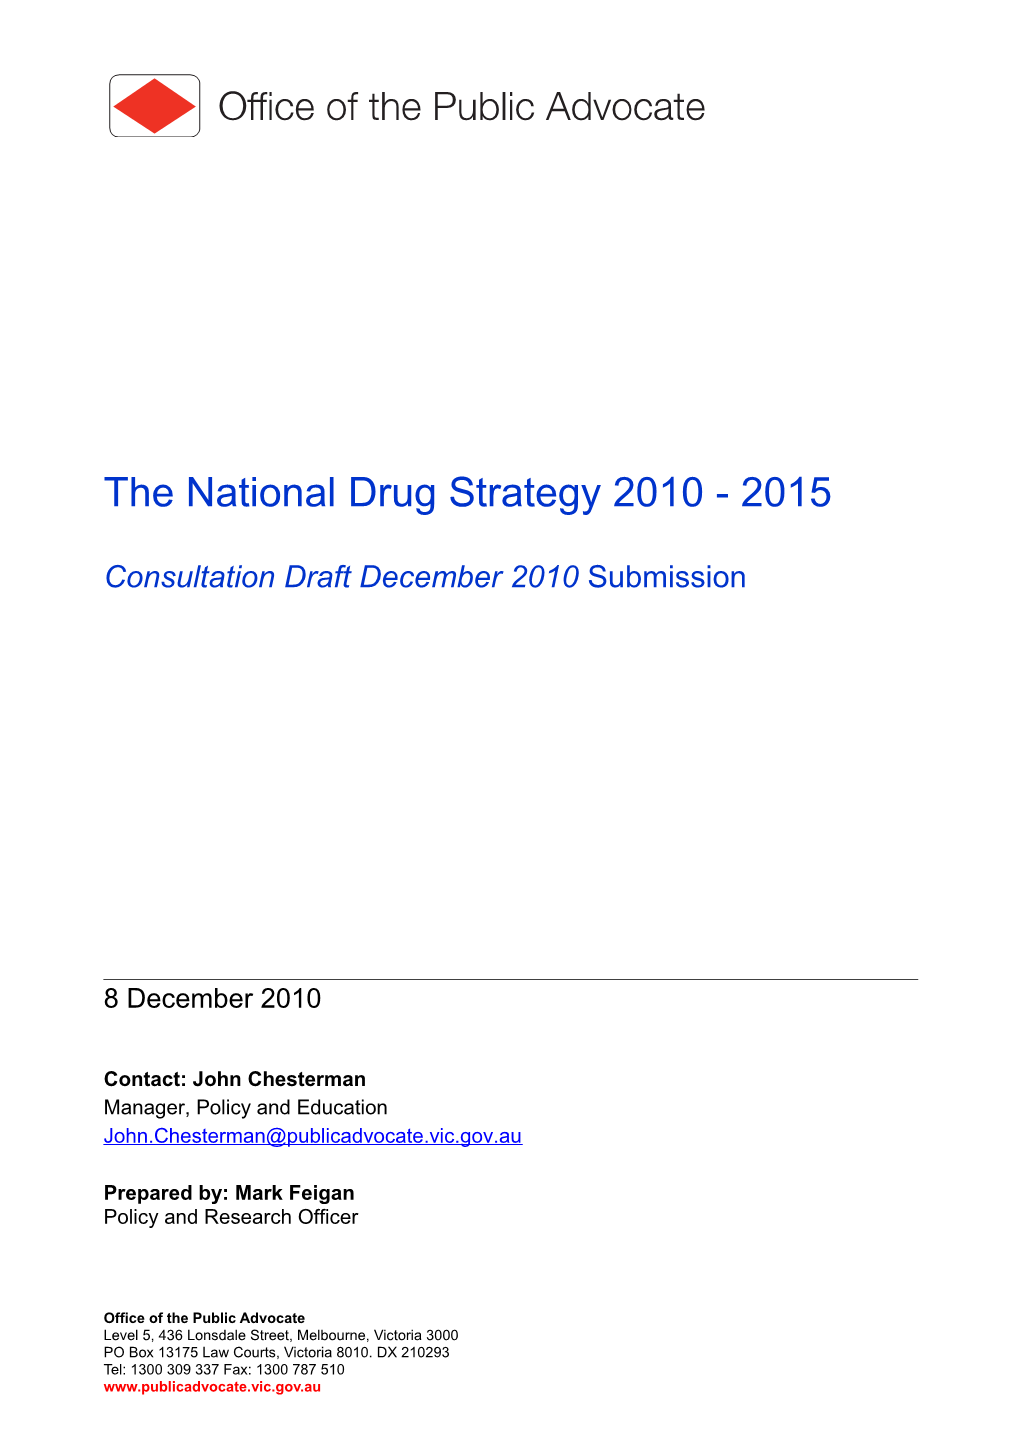 The National Drug Strategy 2010 - 2015